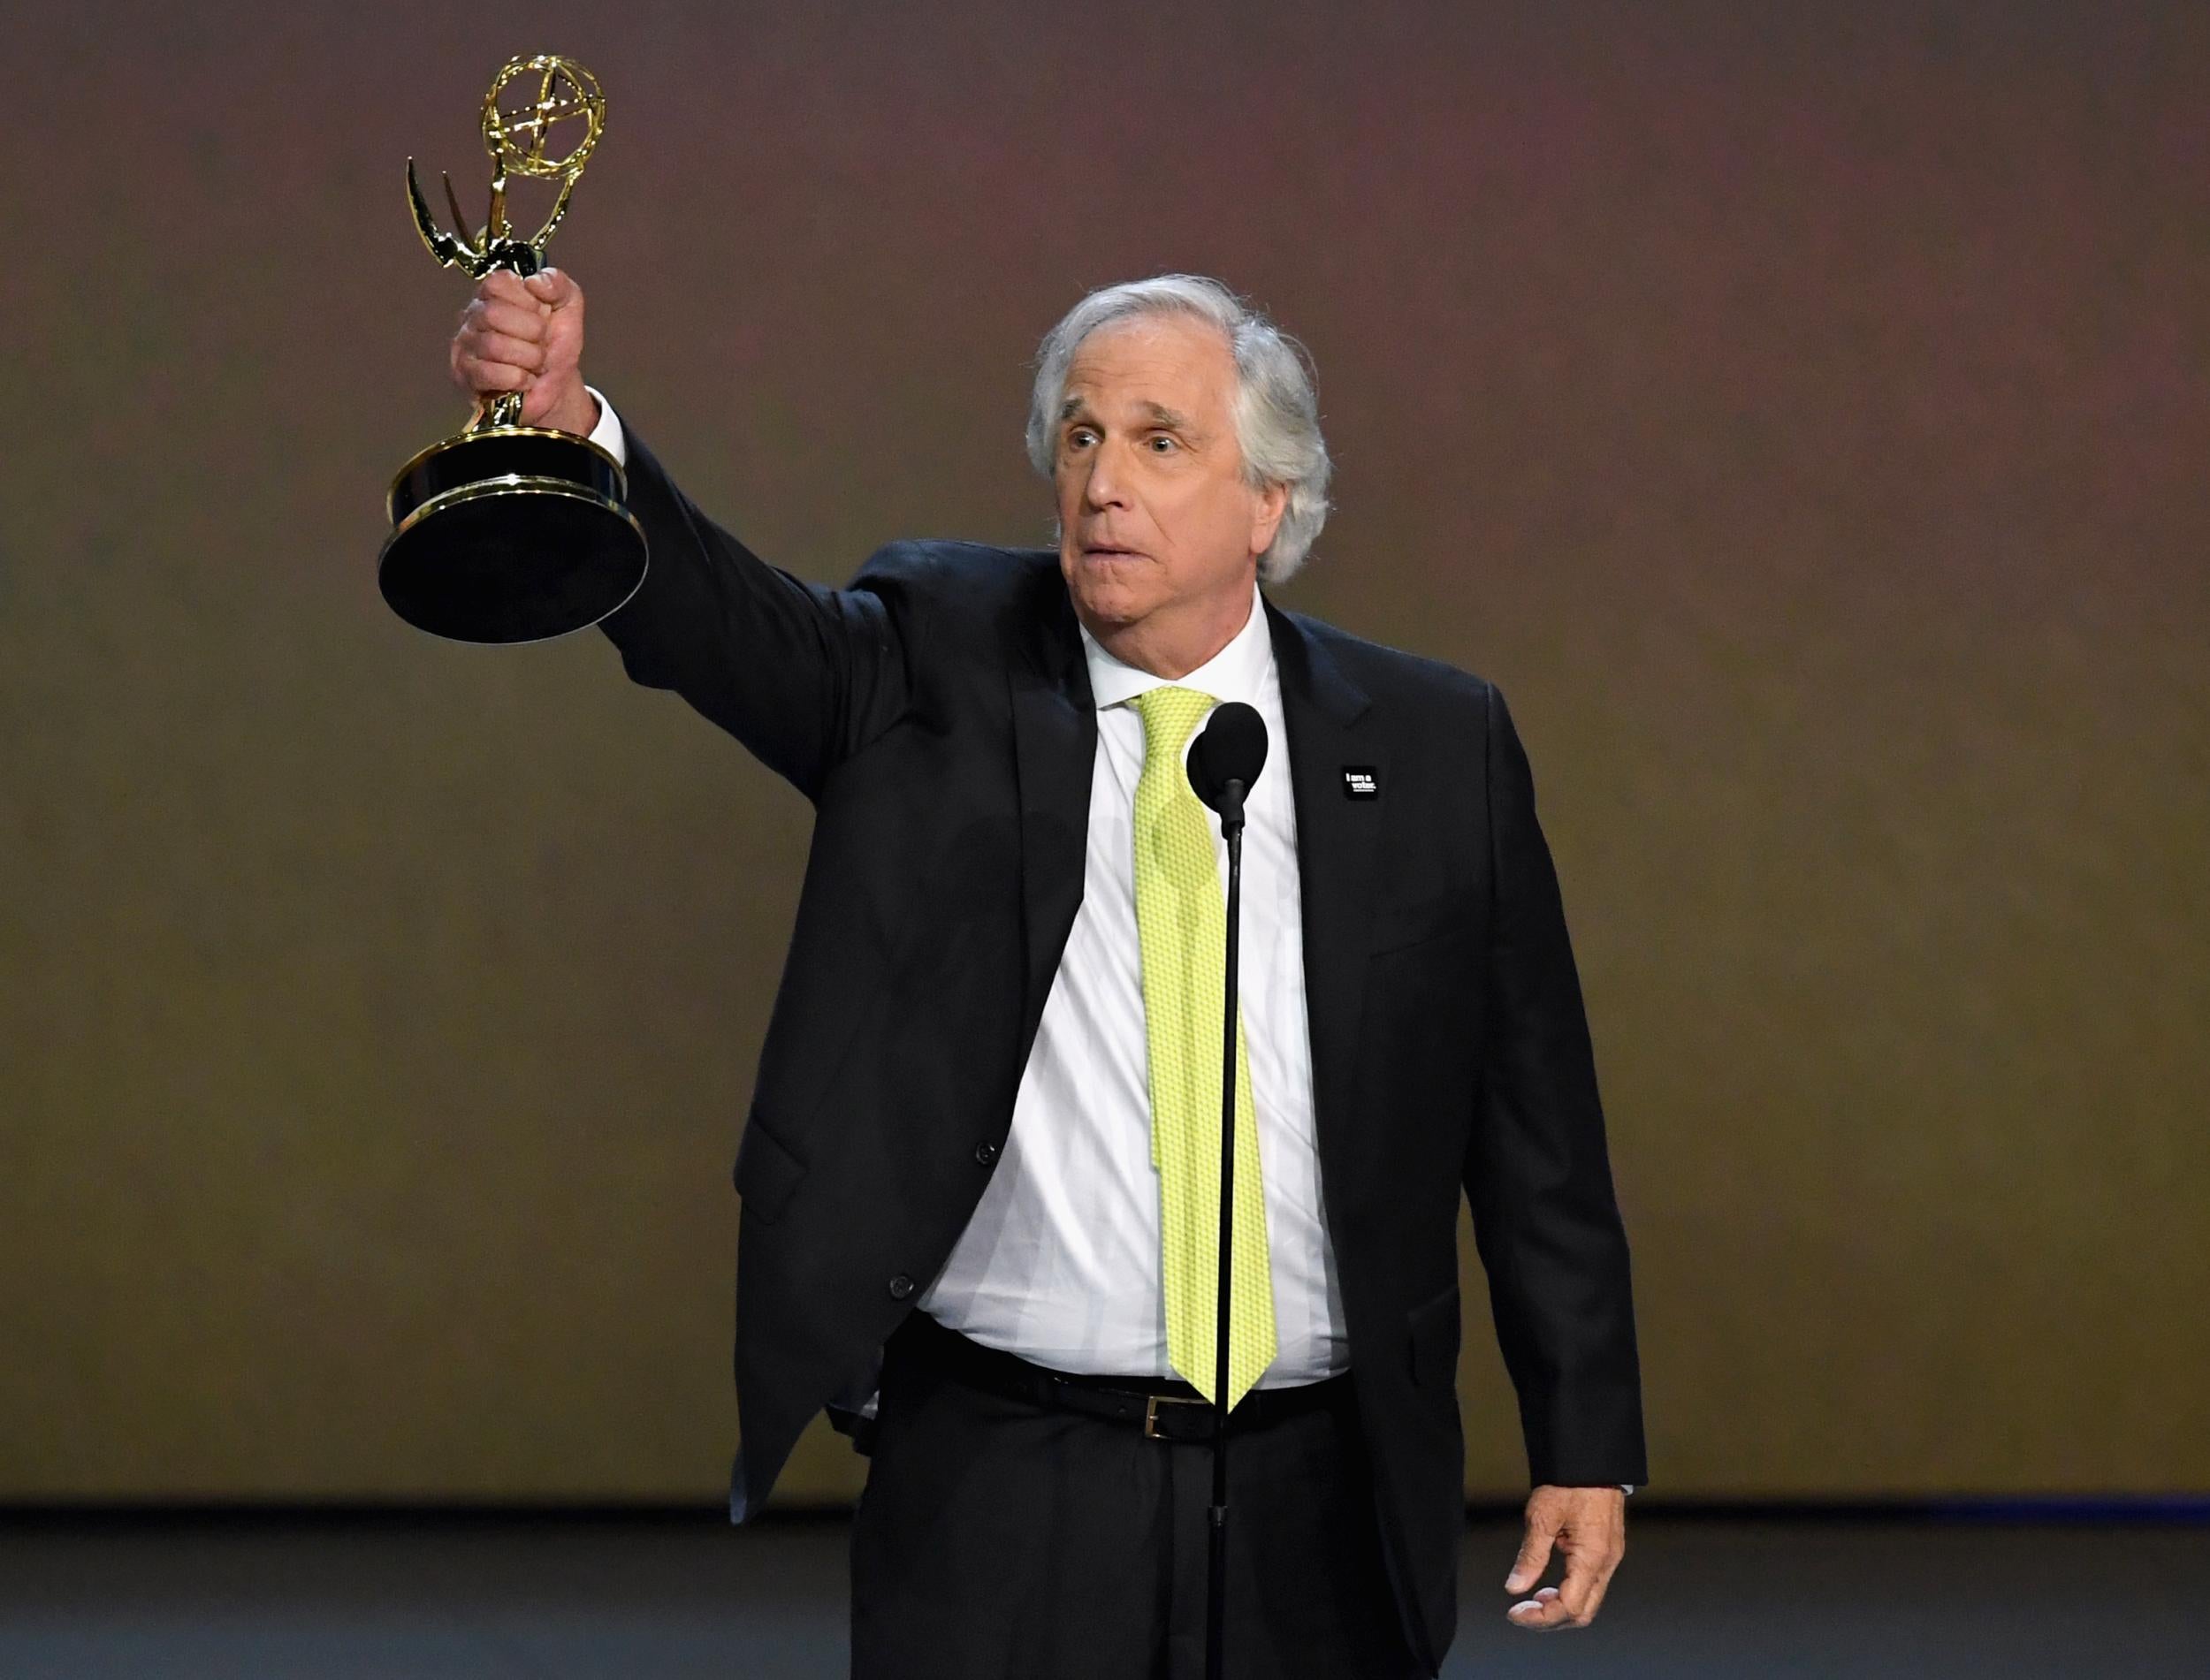 Henry Winkler accepts his first Emmy